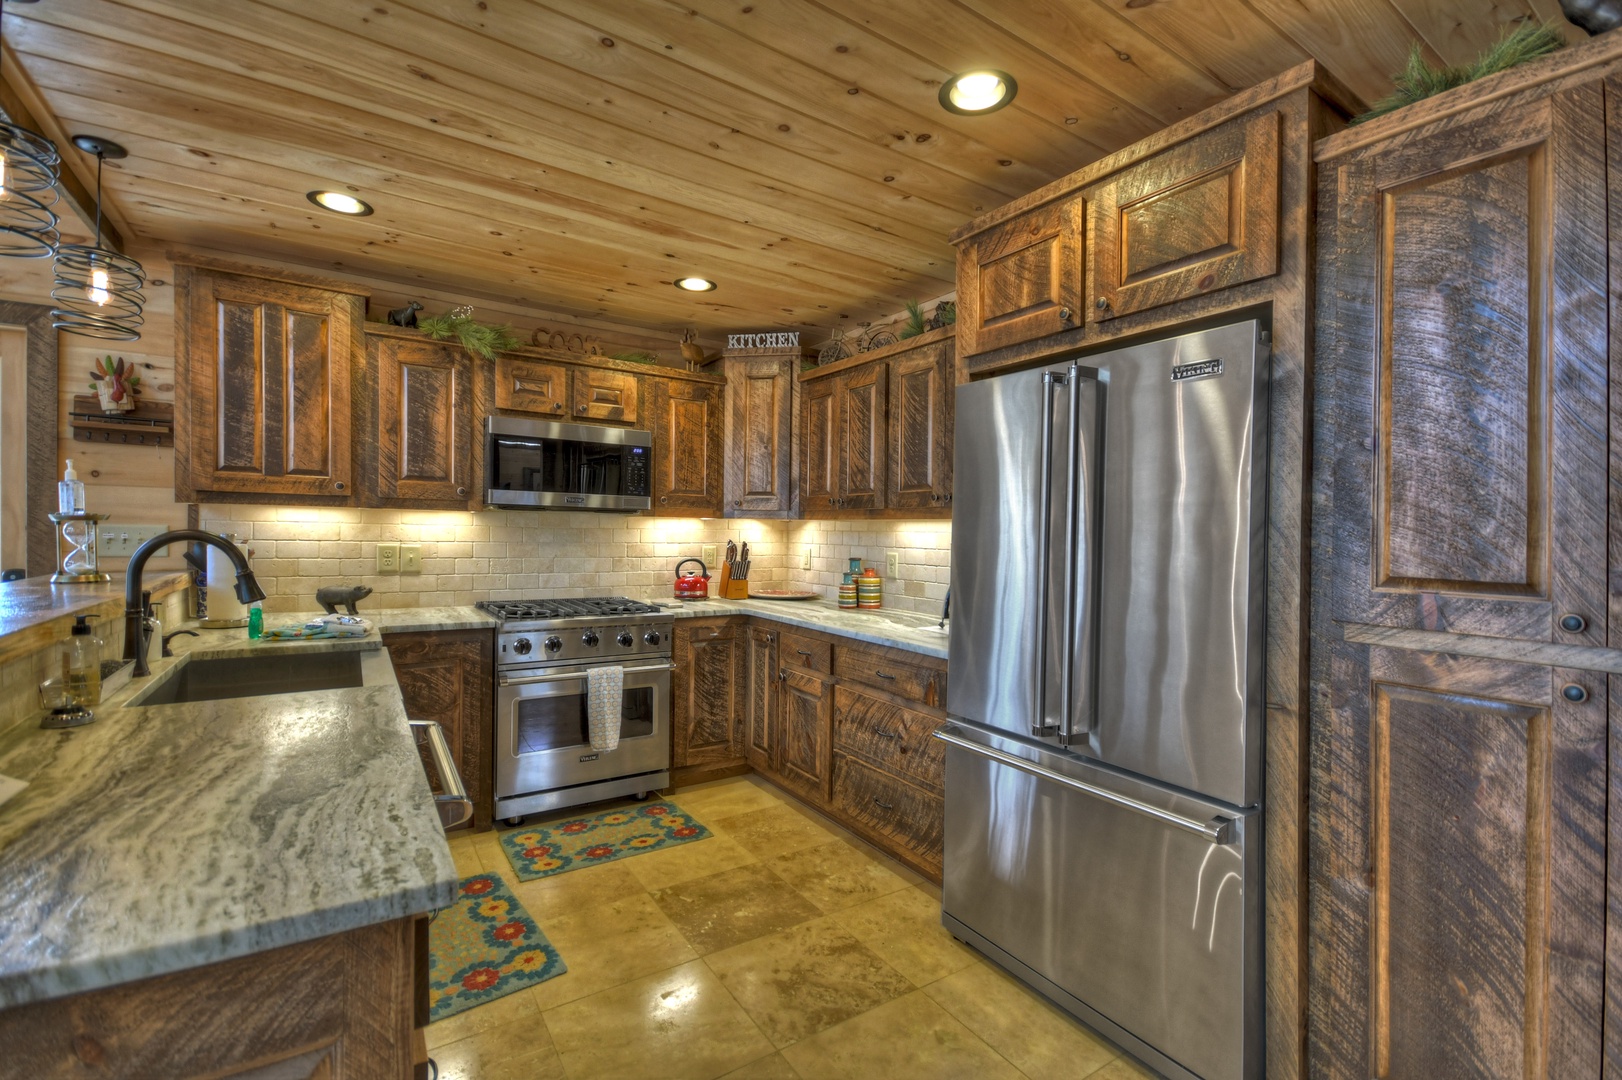 Whisky Creek Retreat- Kitchen area with full functioning appliances